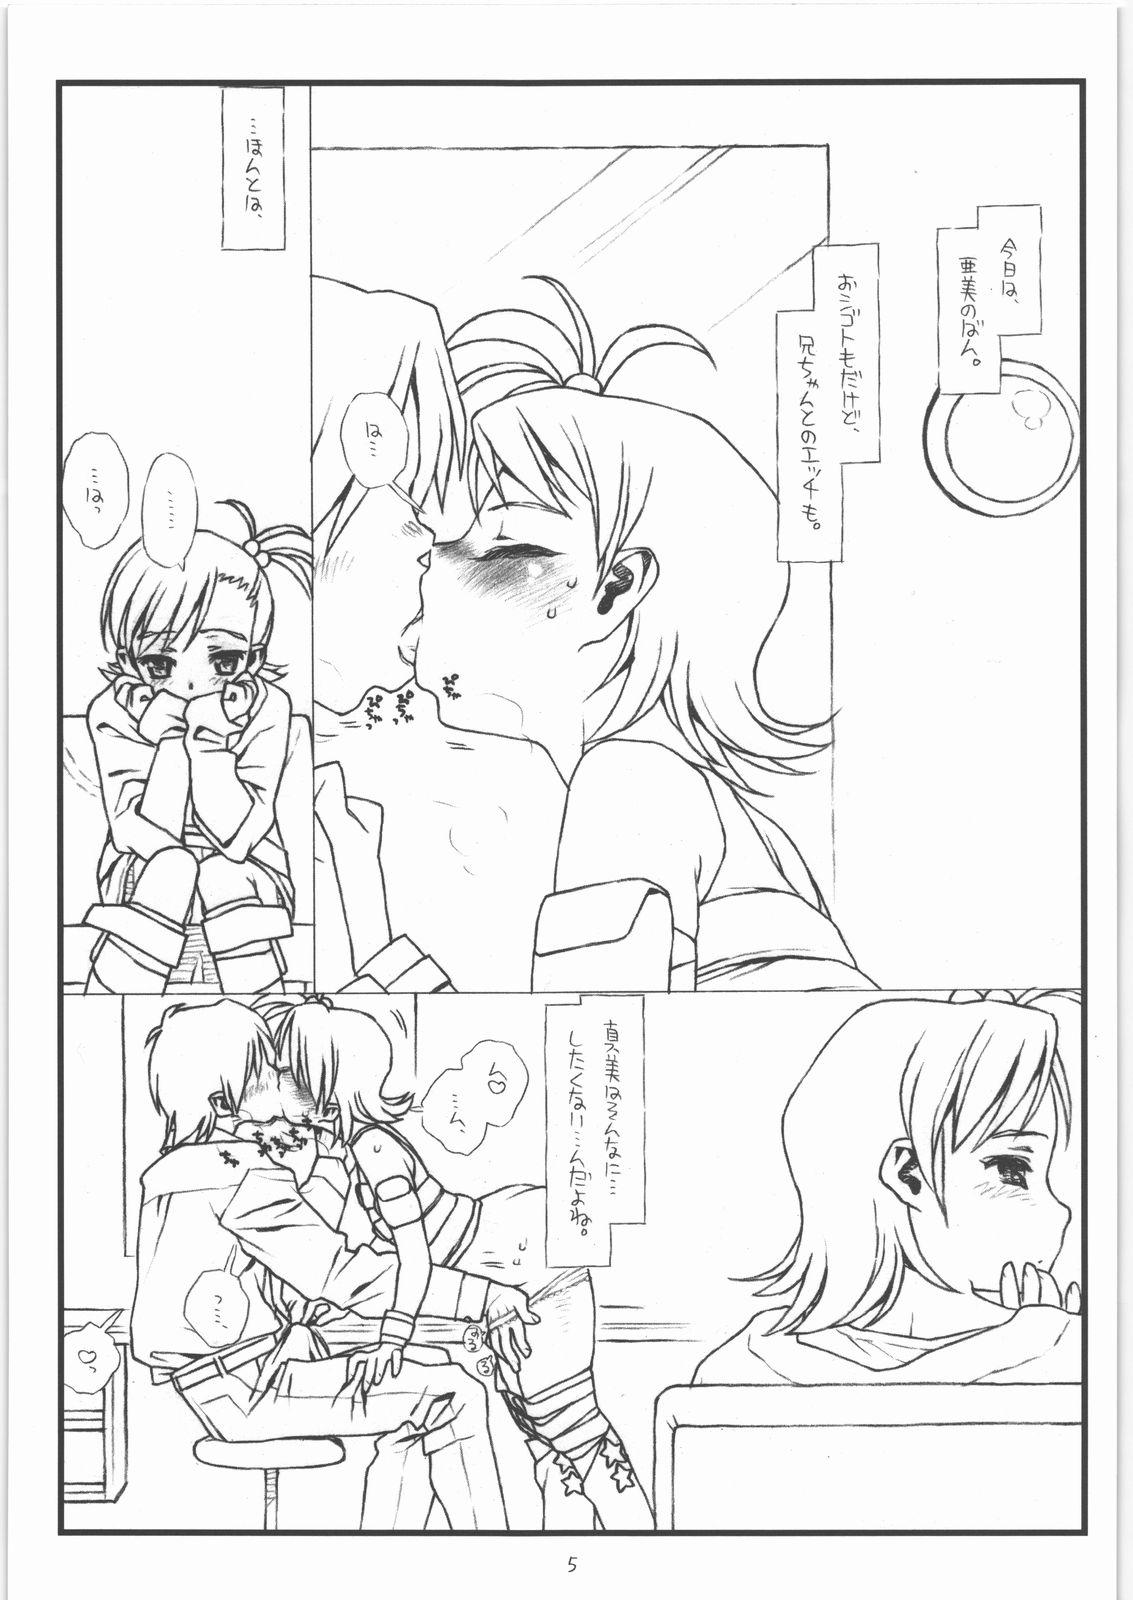 Condom Flip, Flop & Fly - The idolmaster Perrito - Page 2